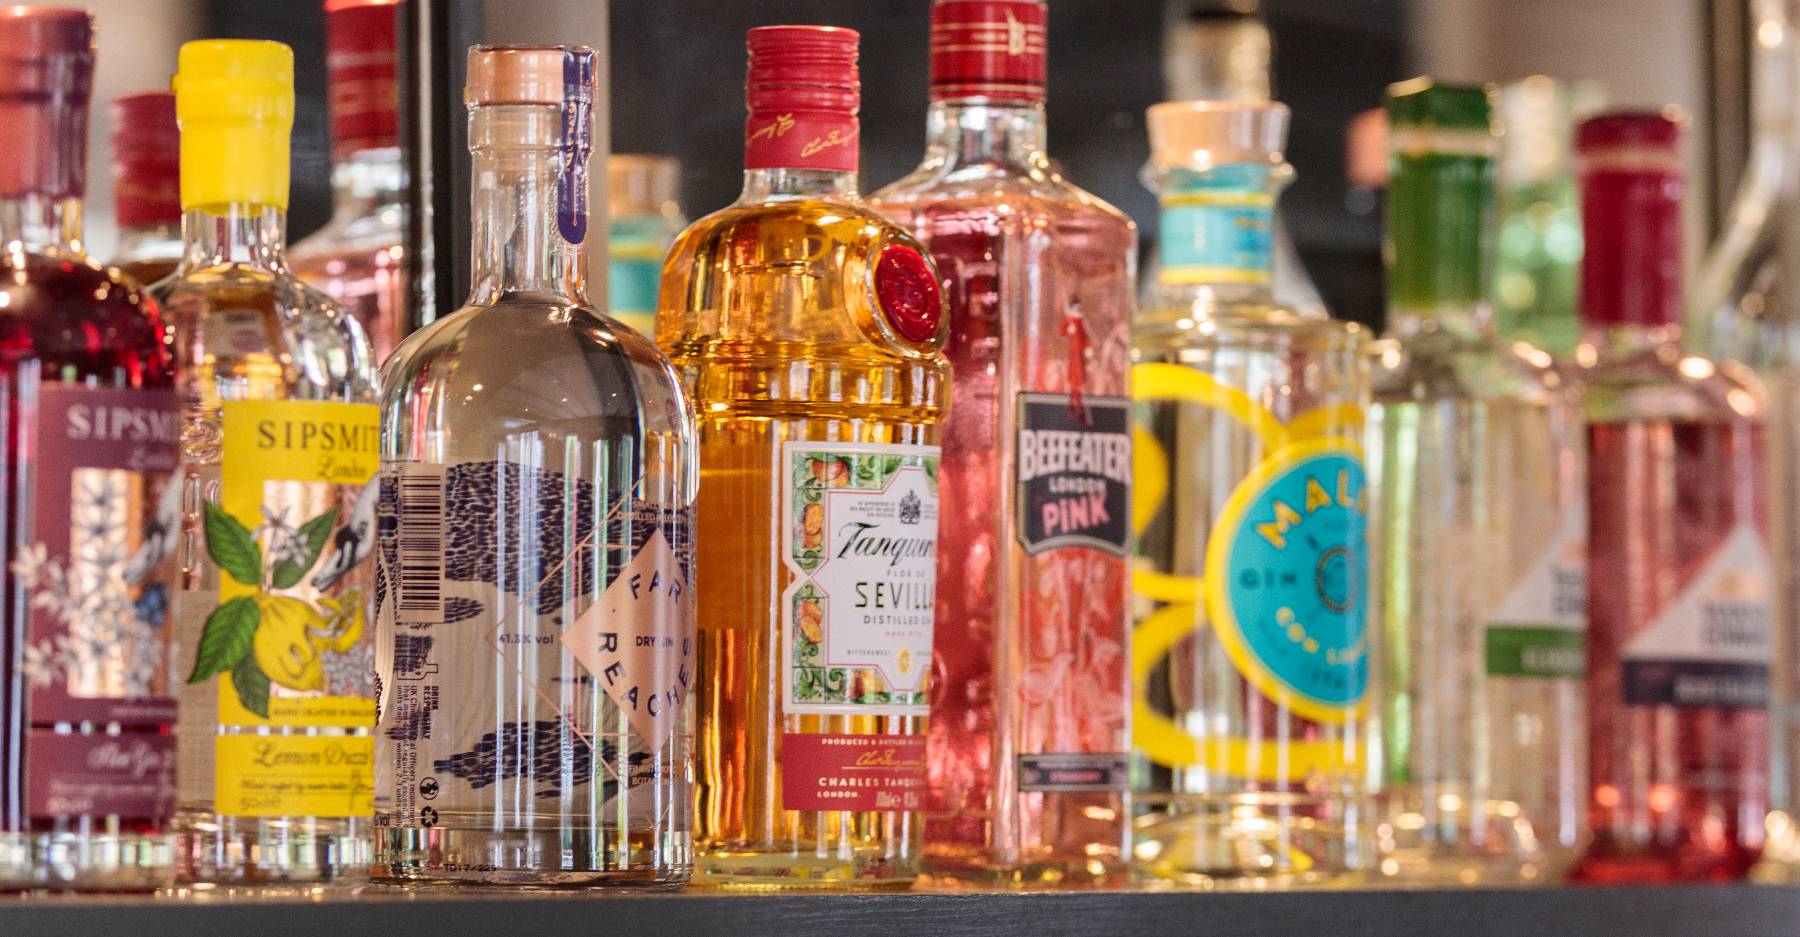 Spirits including a range of gins